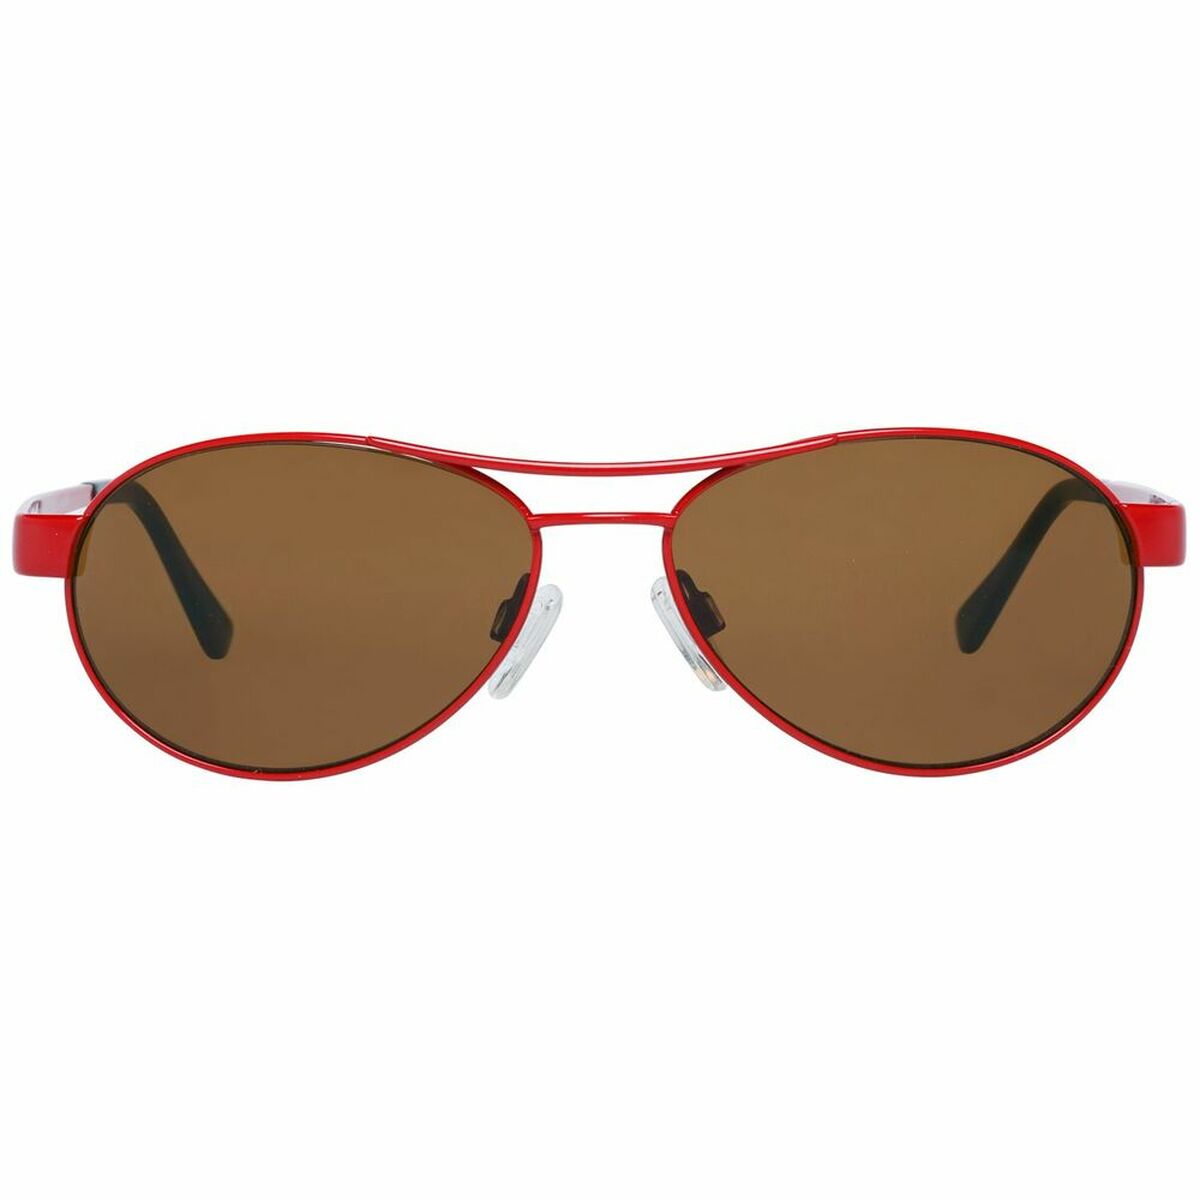 Unisex Sunglasses More & More MM54521-54300 Brown Red (ø 54 mm)